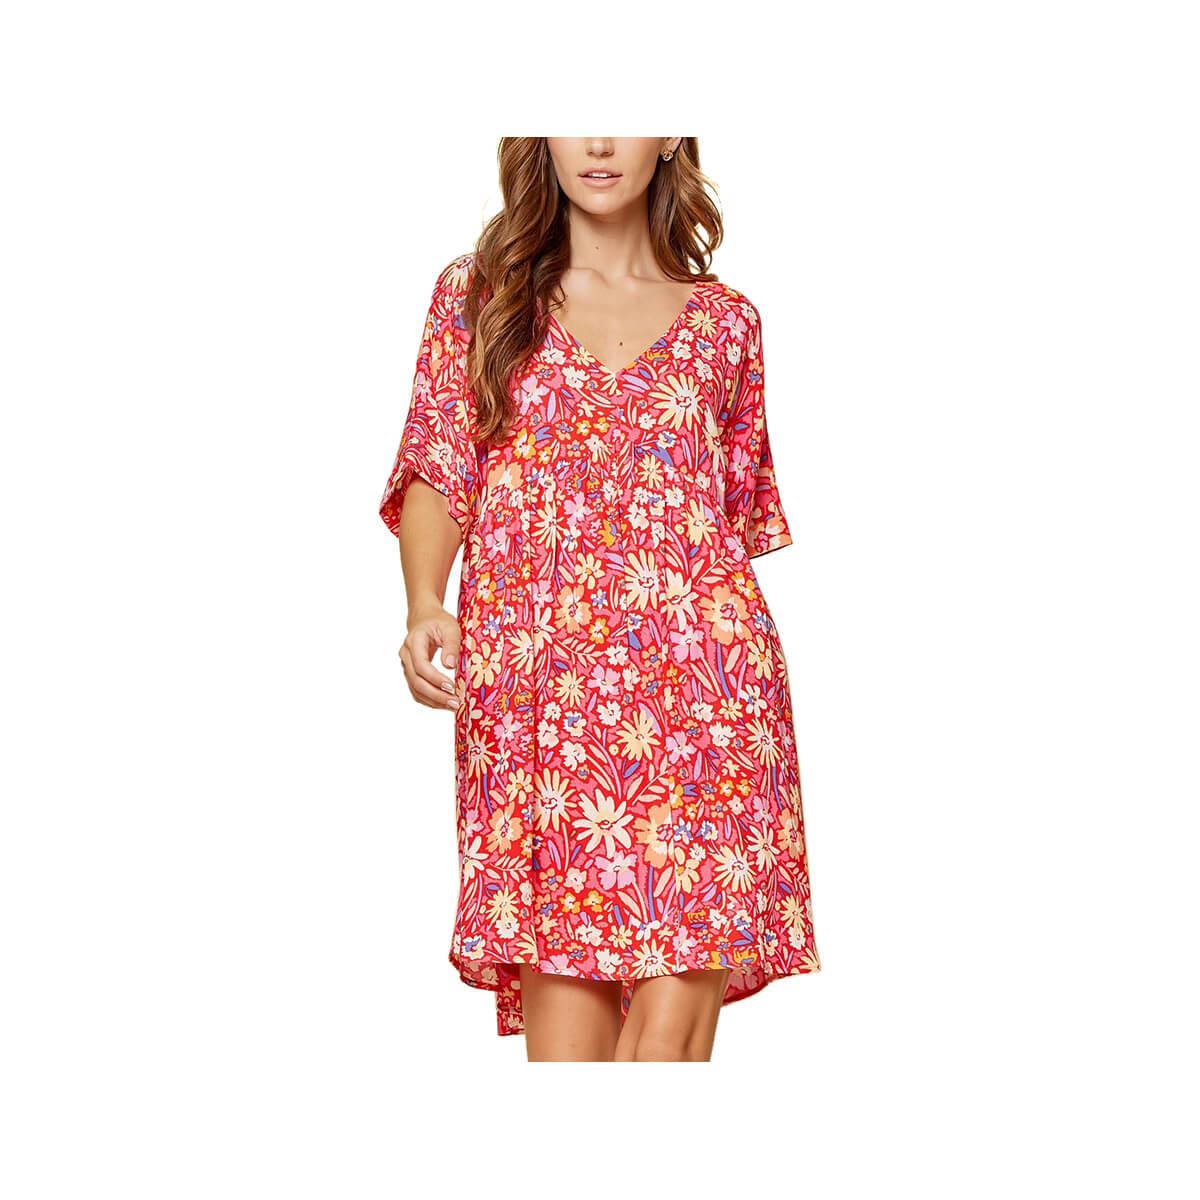  Women's Floral V Neck Elbow Length Sleeve Baby Doll Dress